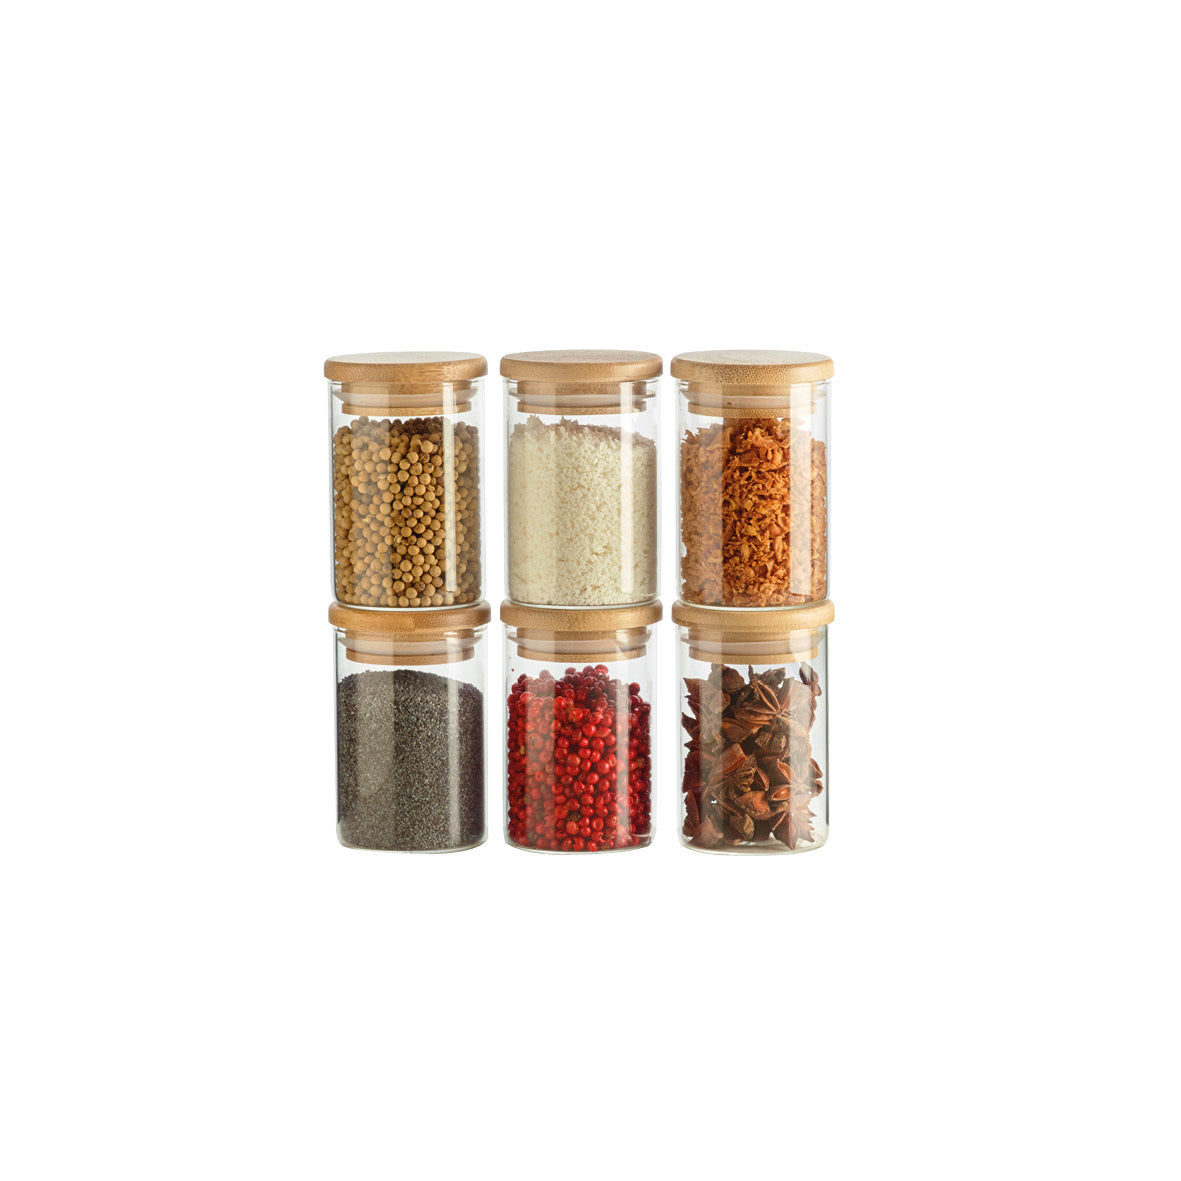 Set of 6 small glass spice jars with bamboo lid - transparent